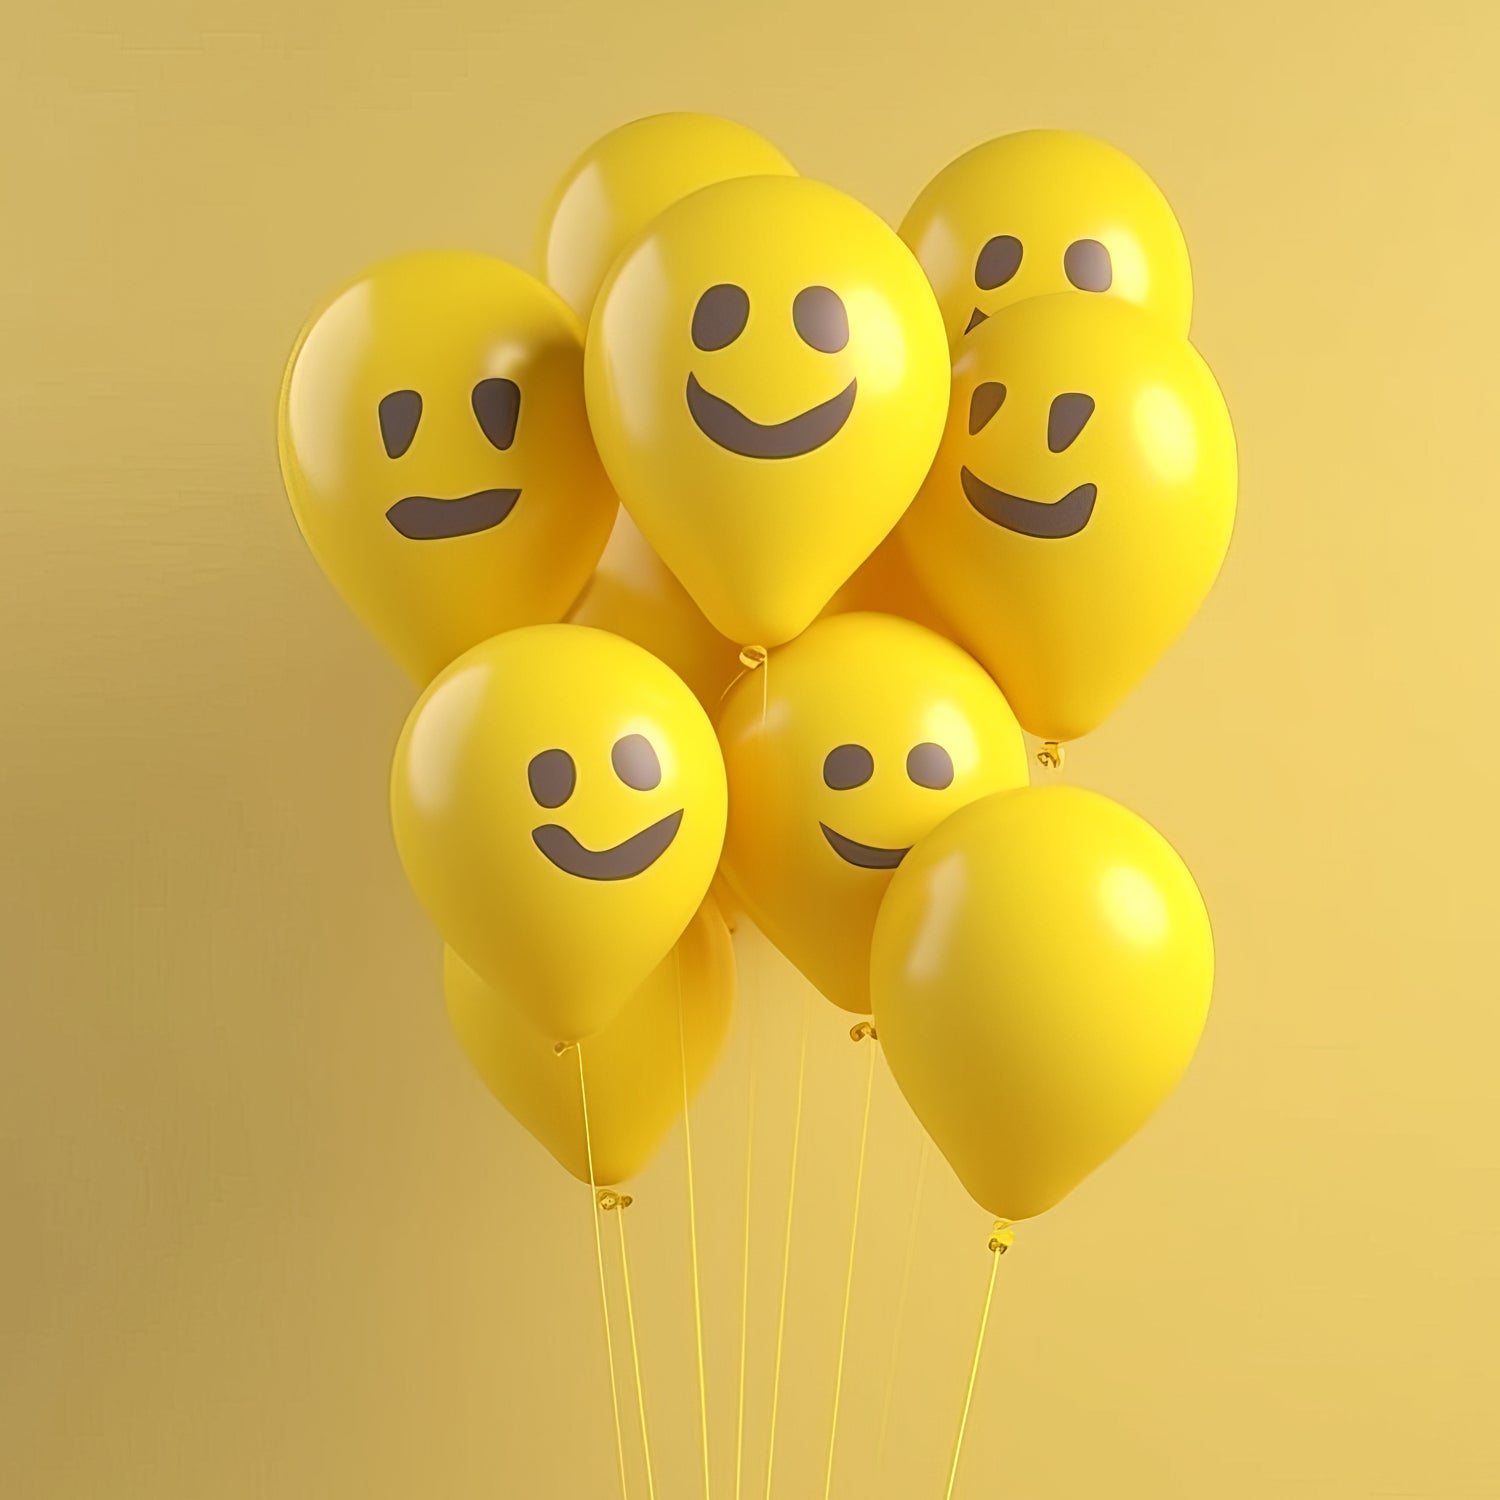 8895 Cartoon Printed Design Balloons Kinds of Latex Balloons for Birthday/Anniversary/Valentine's/Wedding/Engagement Party Decoration Birthday Decoration Items for Kids One Color (20 Pcs Set)